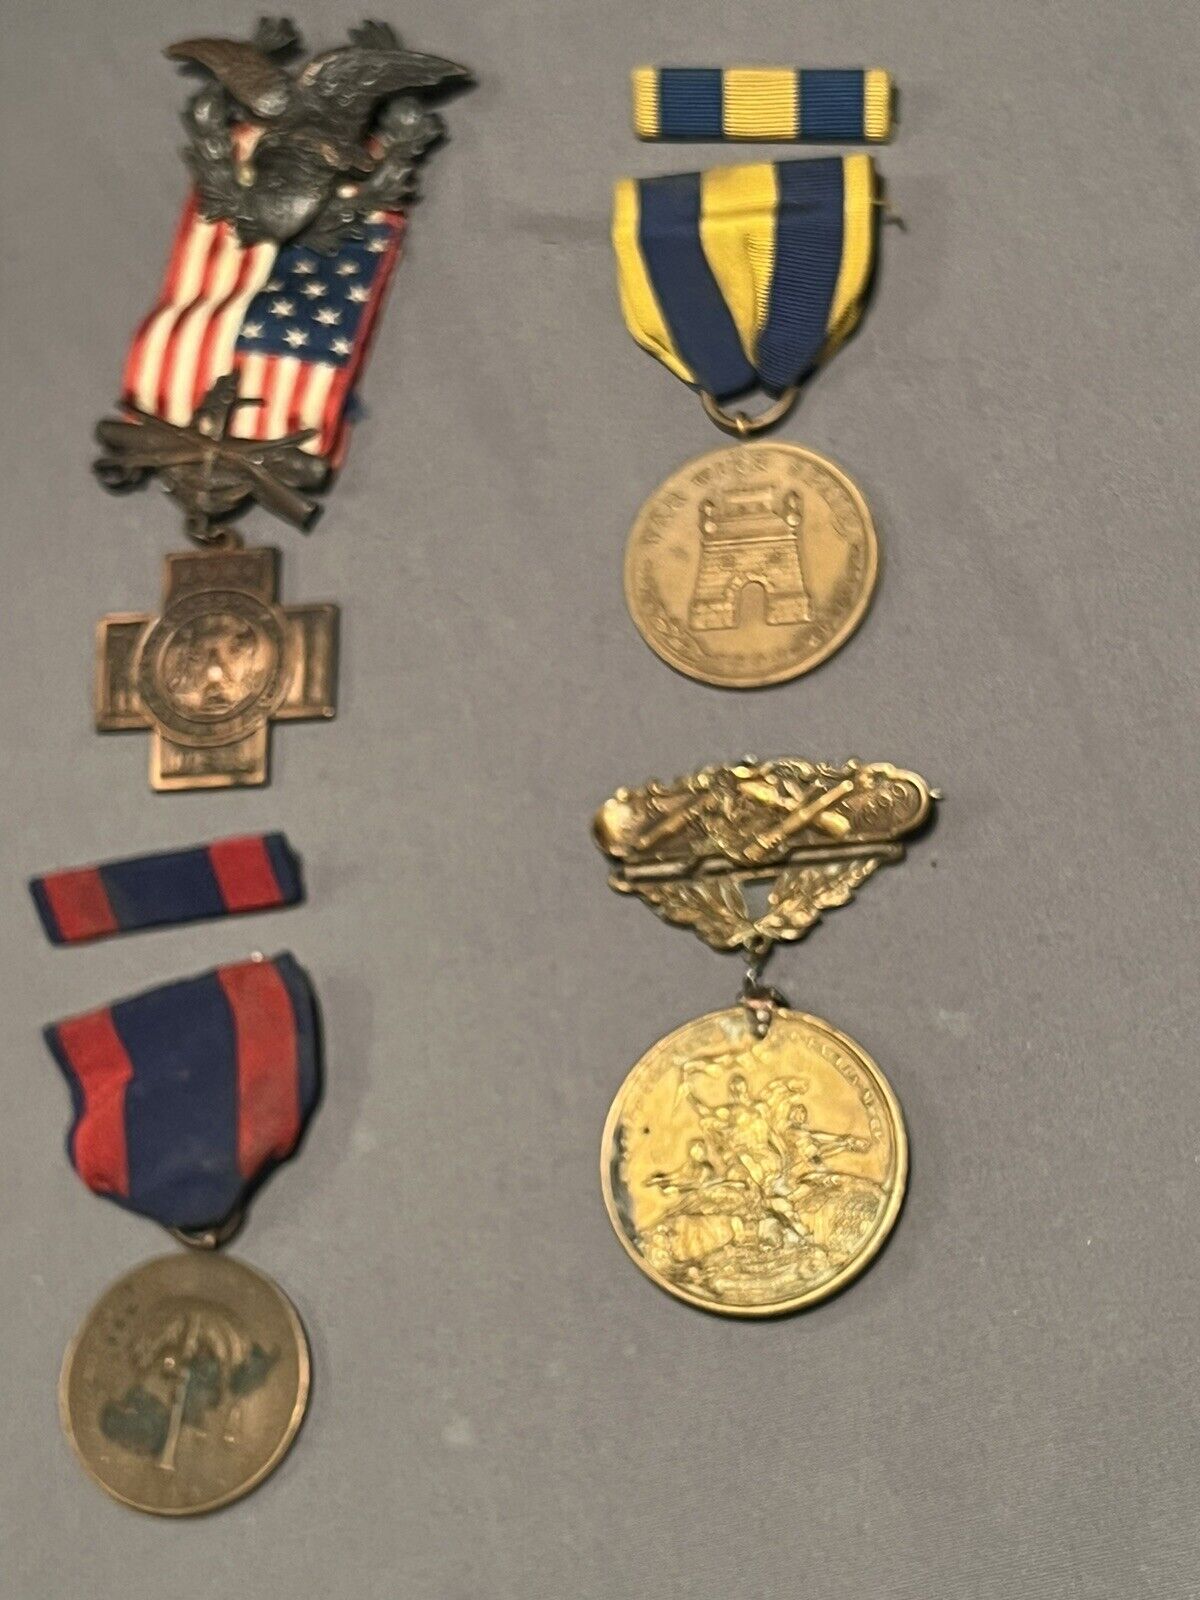 SPANISH AMERICAN WAR VETERANS MEDALS  LOT OF 4  NUMBERED And NAMED